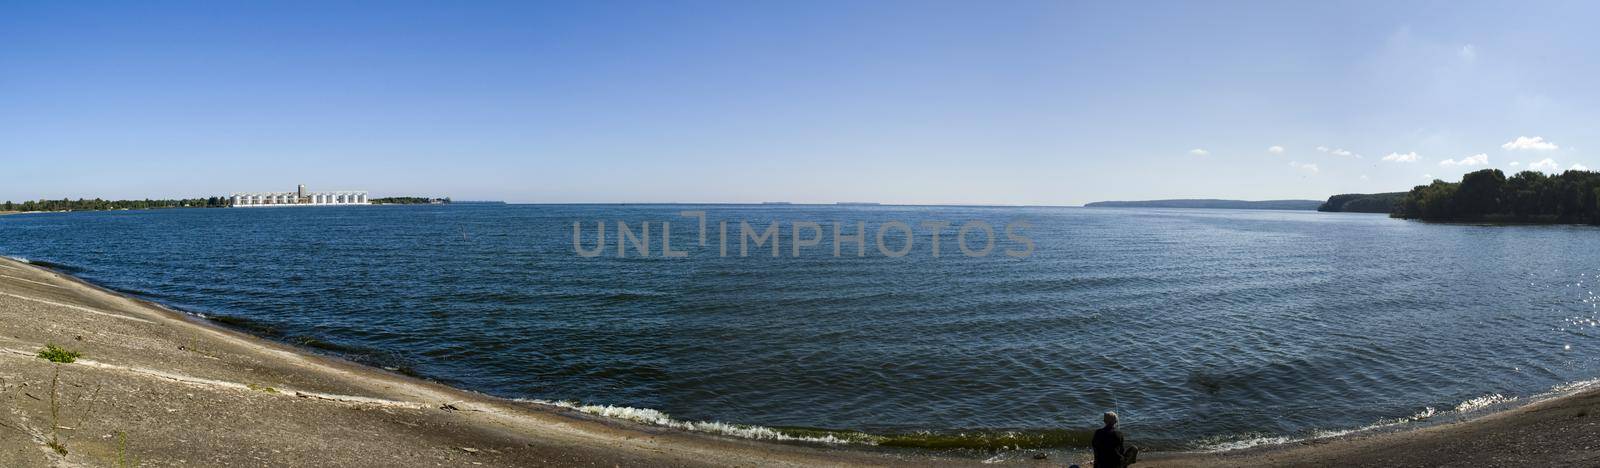 water-nariliche reservoir near the Chyhyryn nuclear power plant. The river Dnipro. by DePo